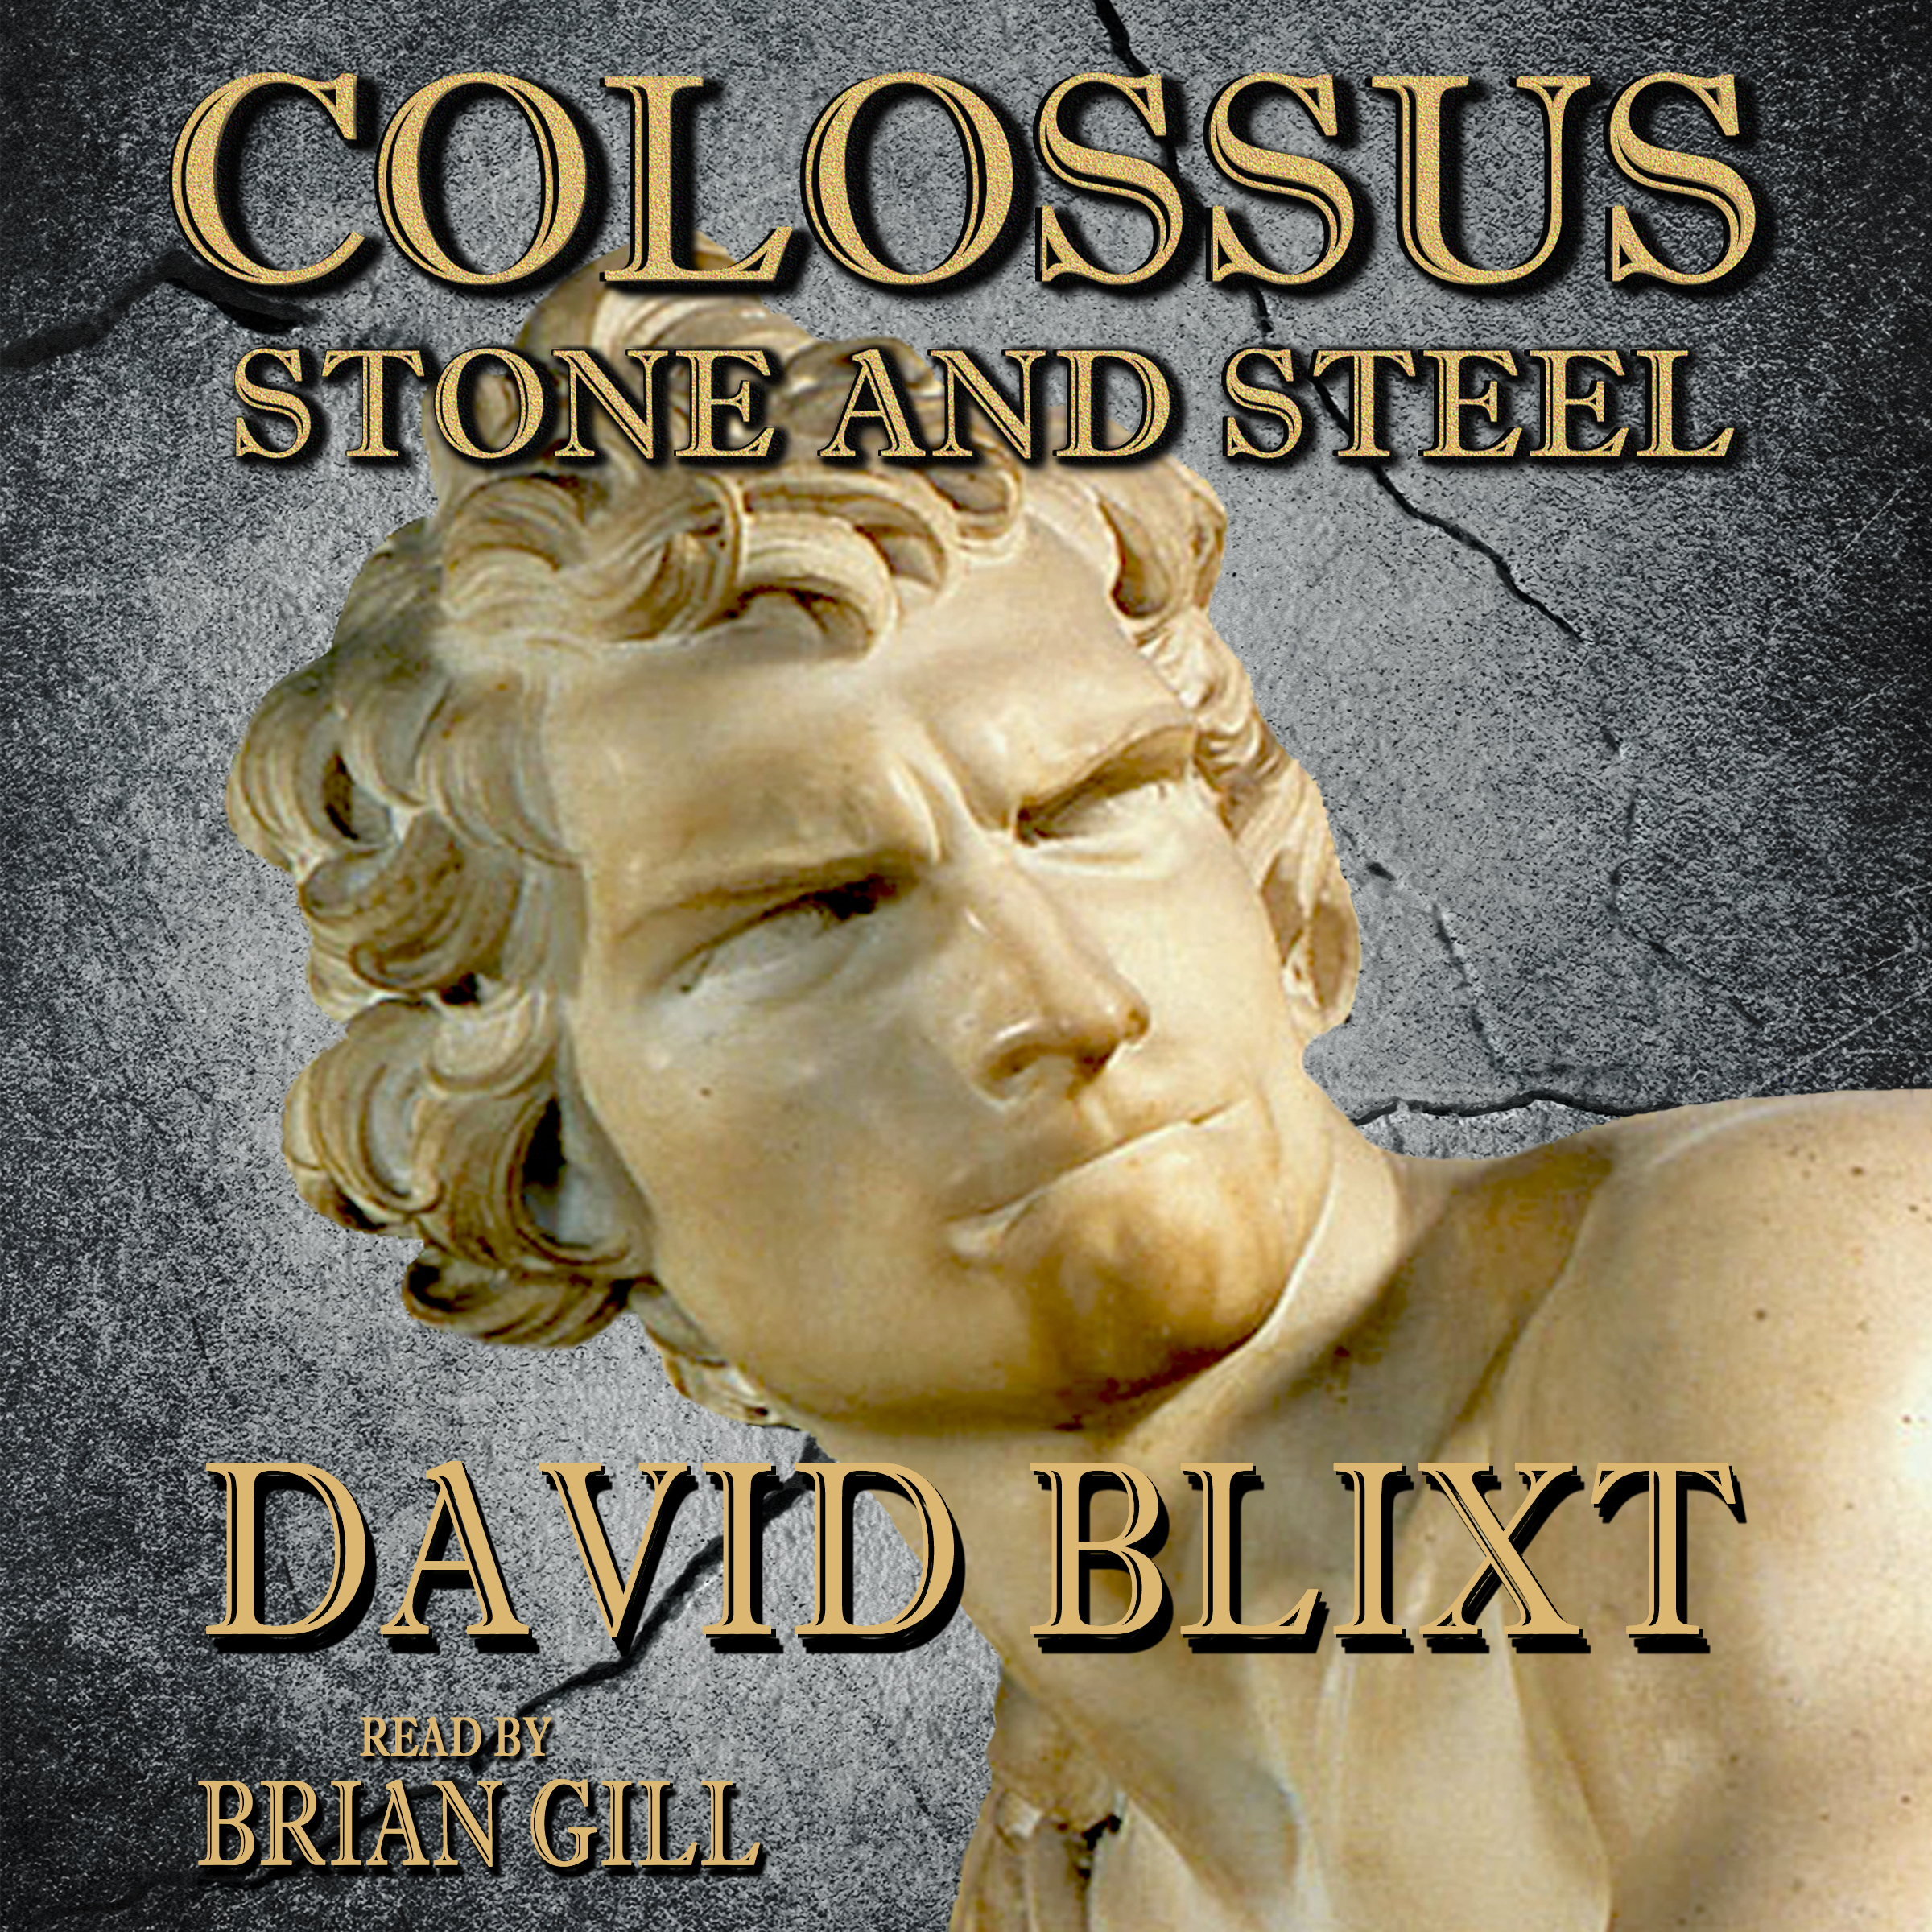 Colossus S&S Audiobook Cover 1a